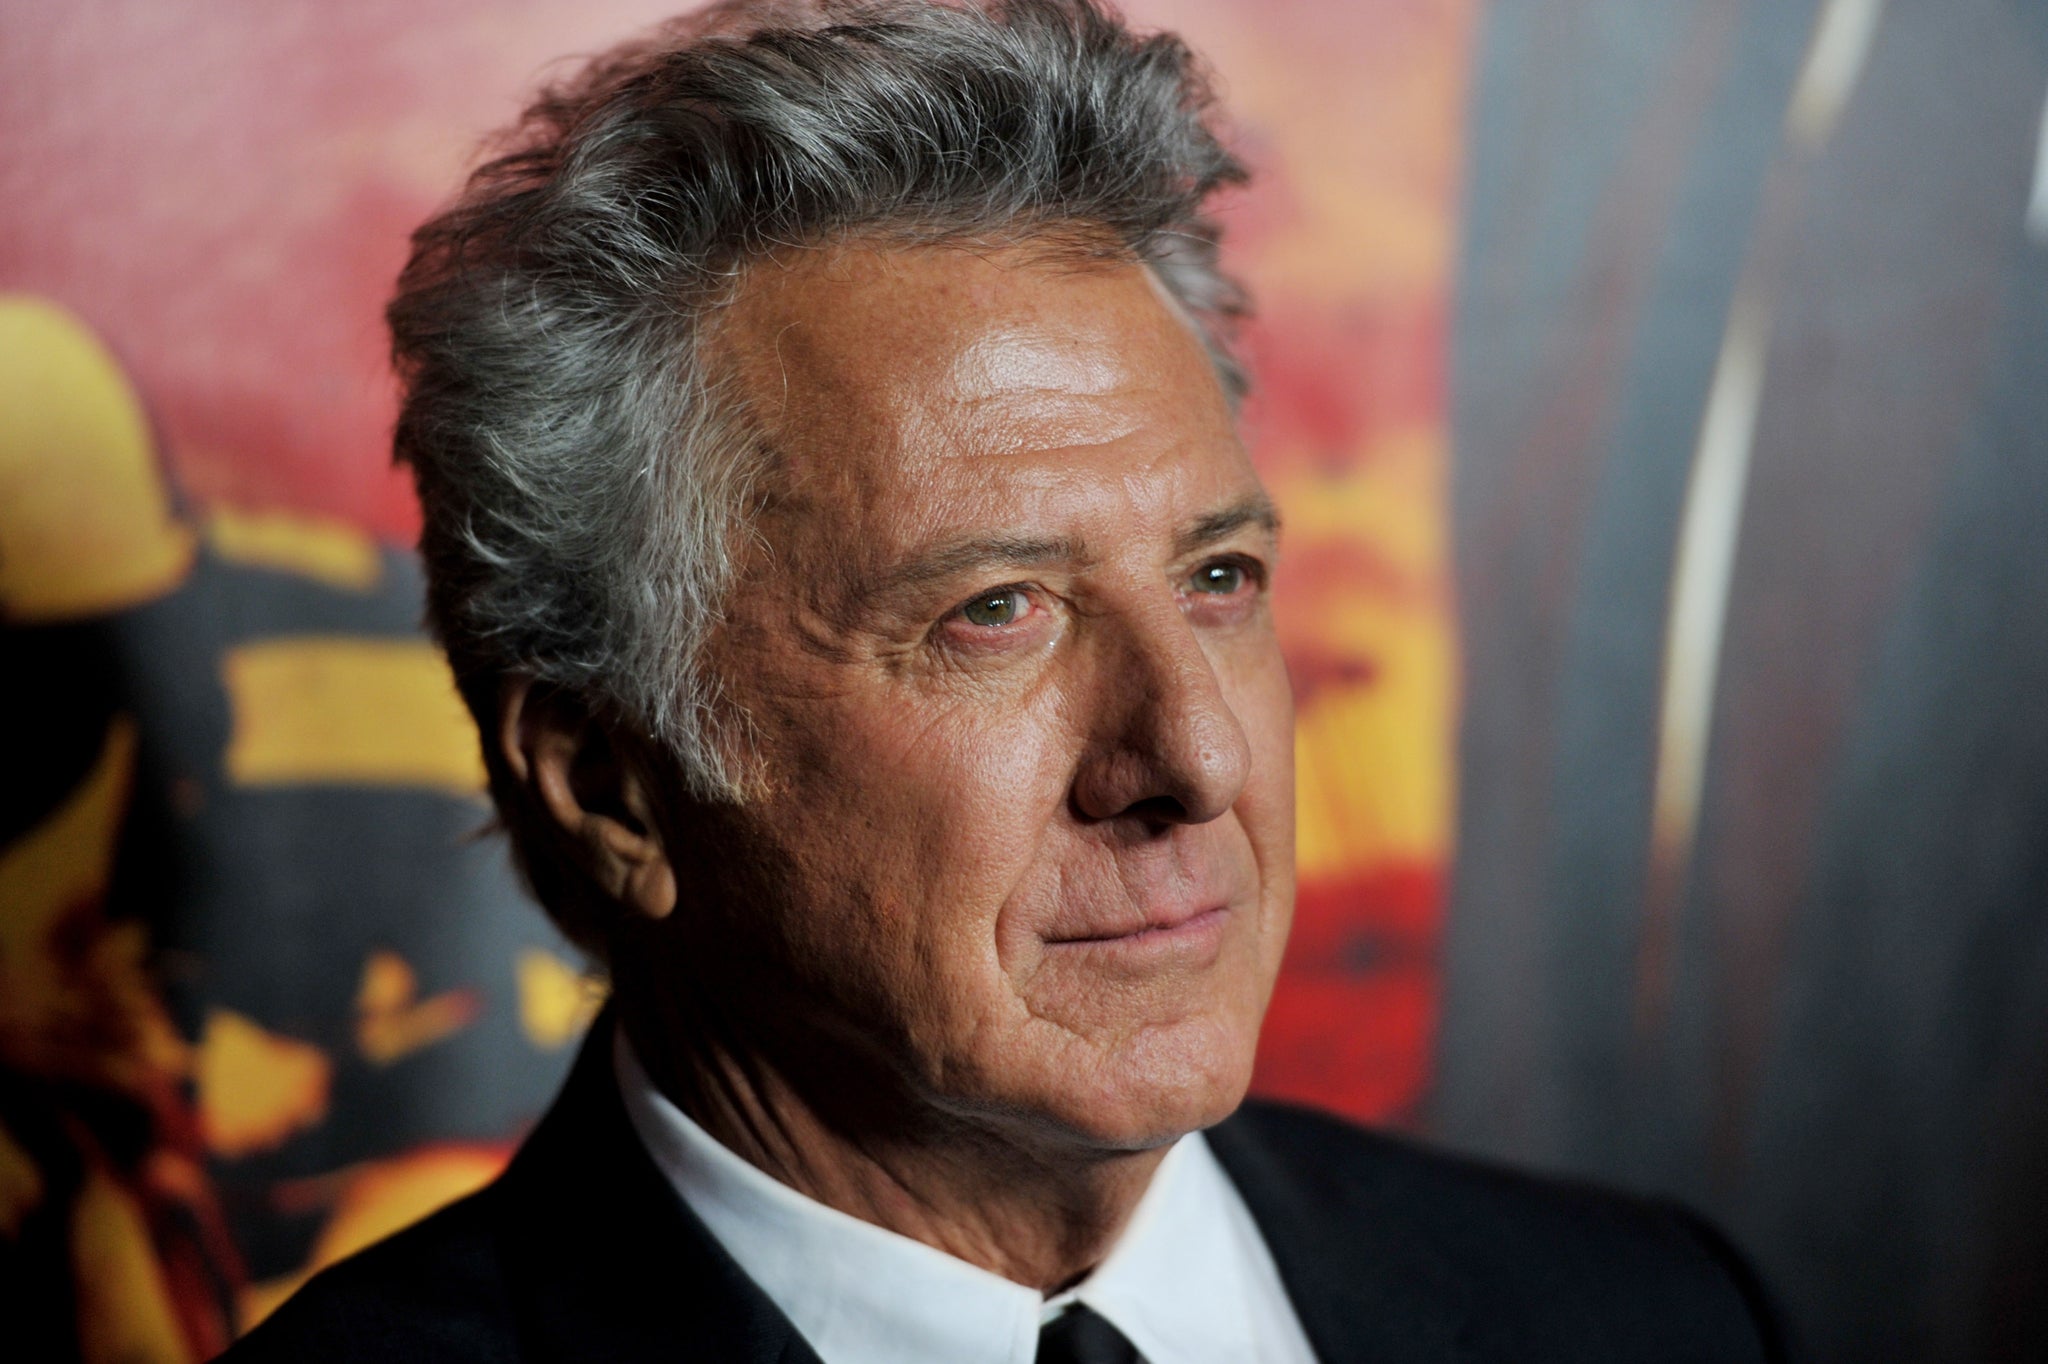 Dustin Hoffman, 75, has been "surgically cured" of cancer